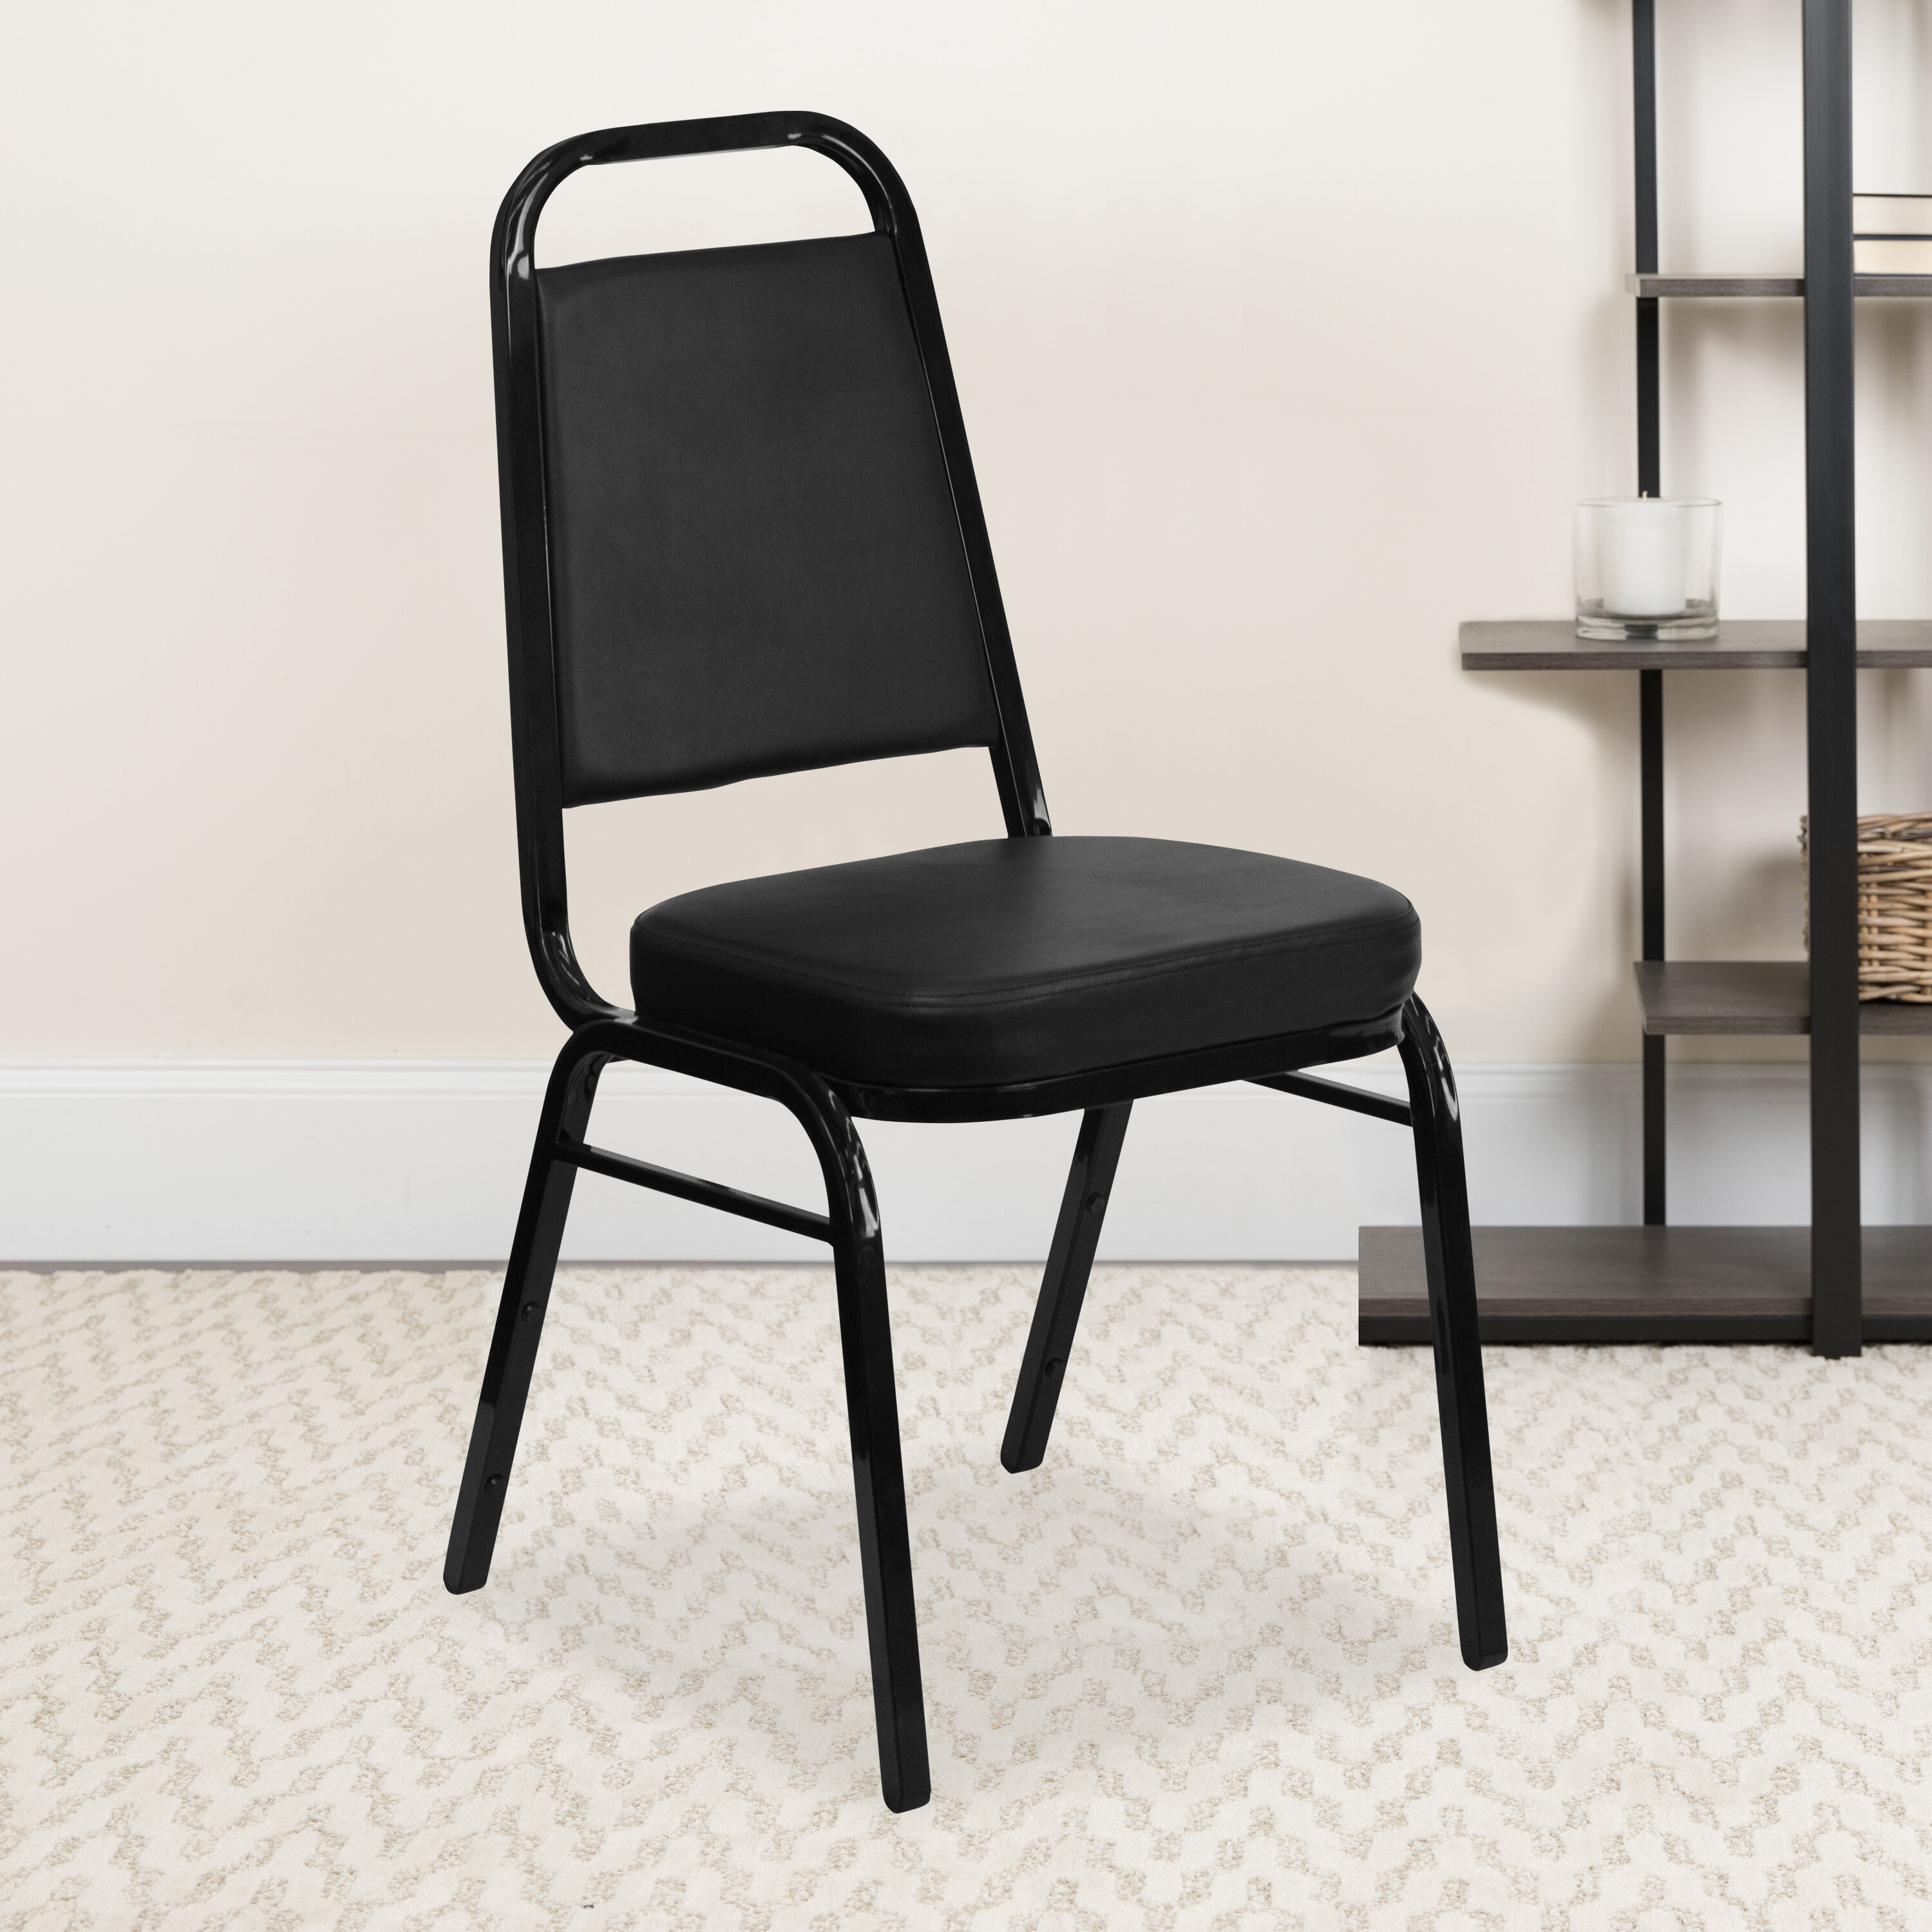  Flash Furniture HERCULES Series Crown Back Stacking Banquet  Chair in Black Vinyl - Silver Vein Frame : Flash Furniture: Office Products